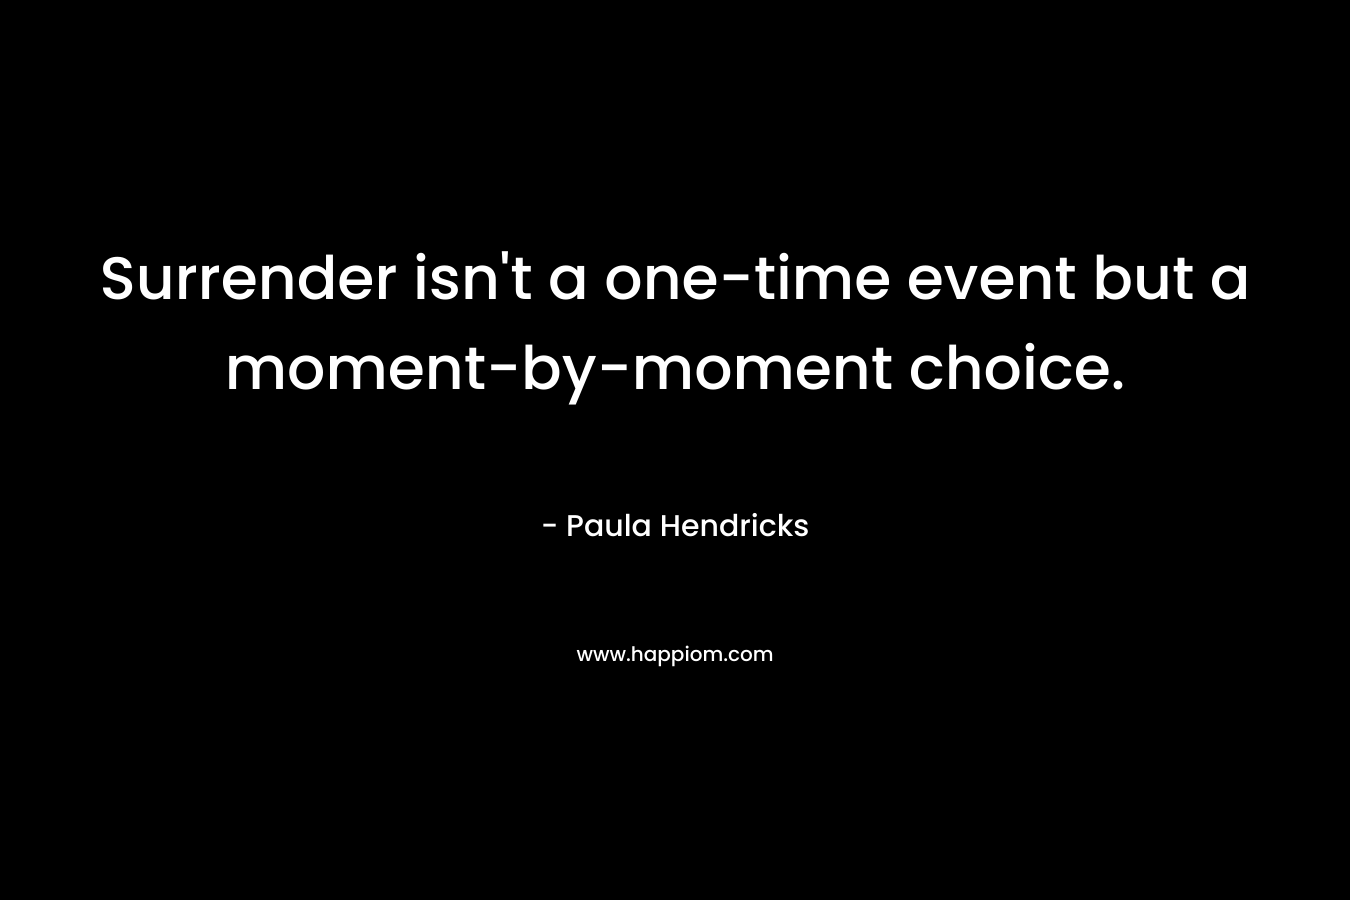 Surrender isn’t a one-time event but a moment-by-moment choice. – Paula Hendricks